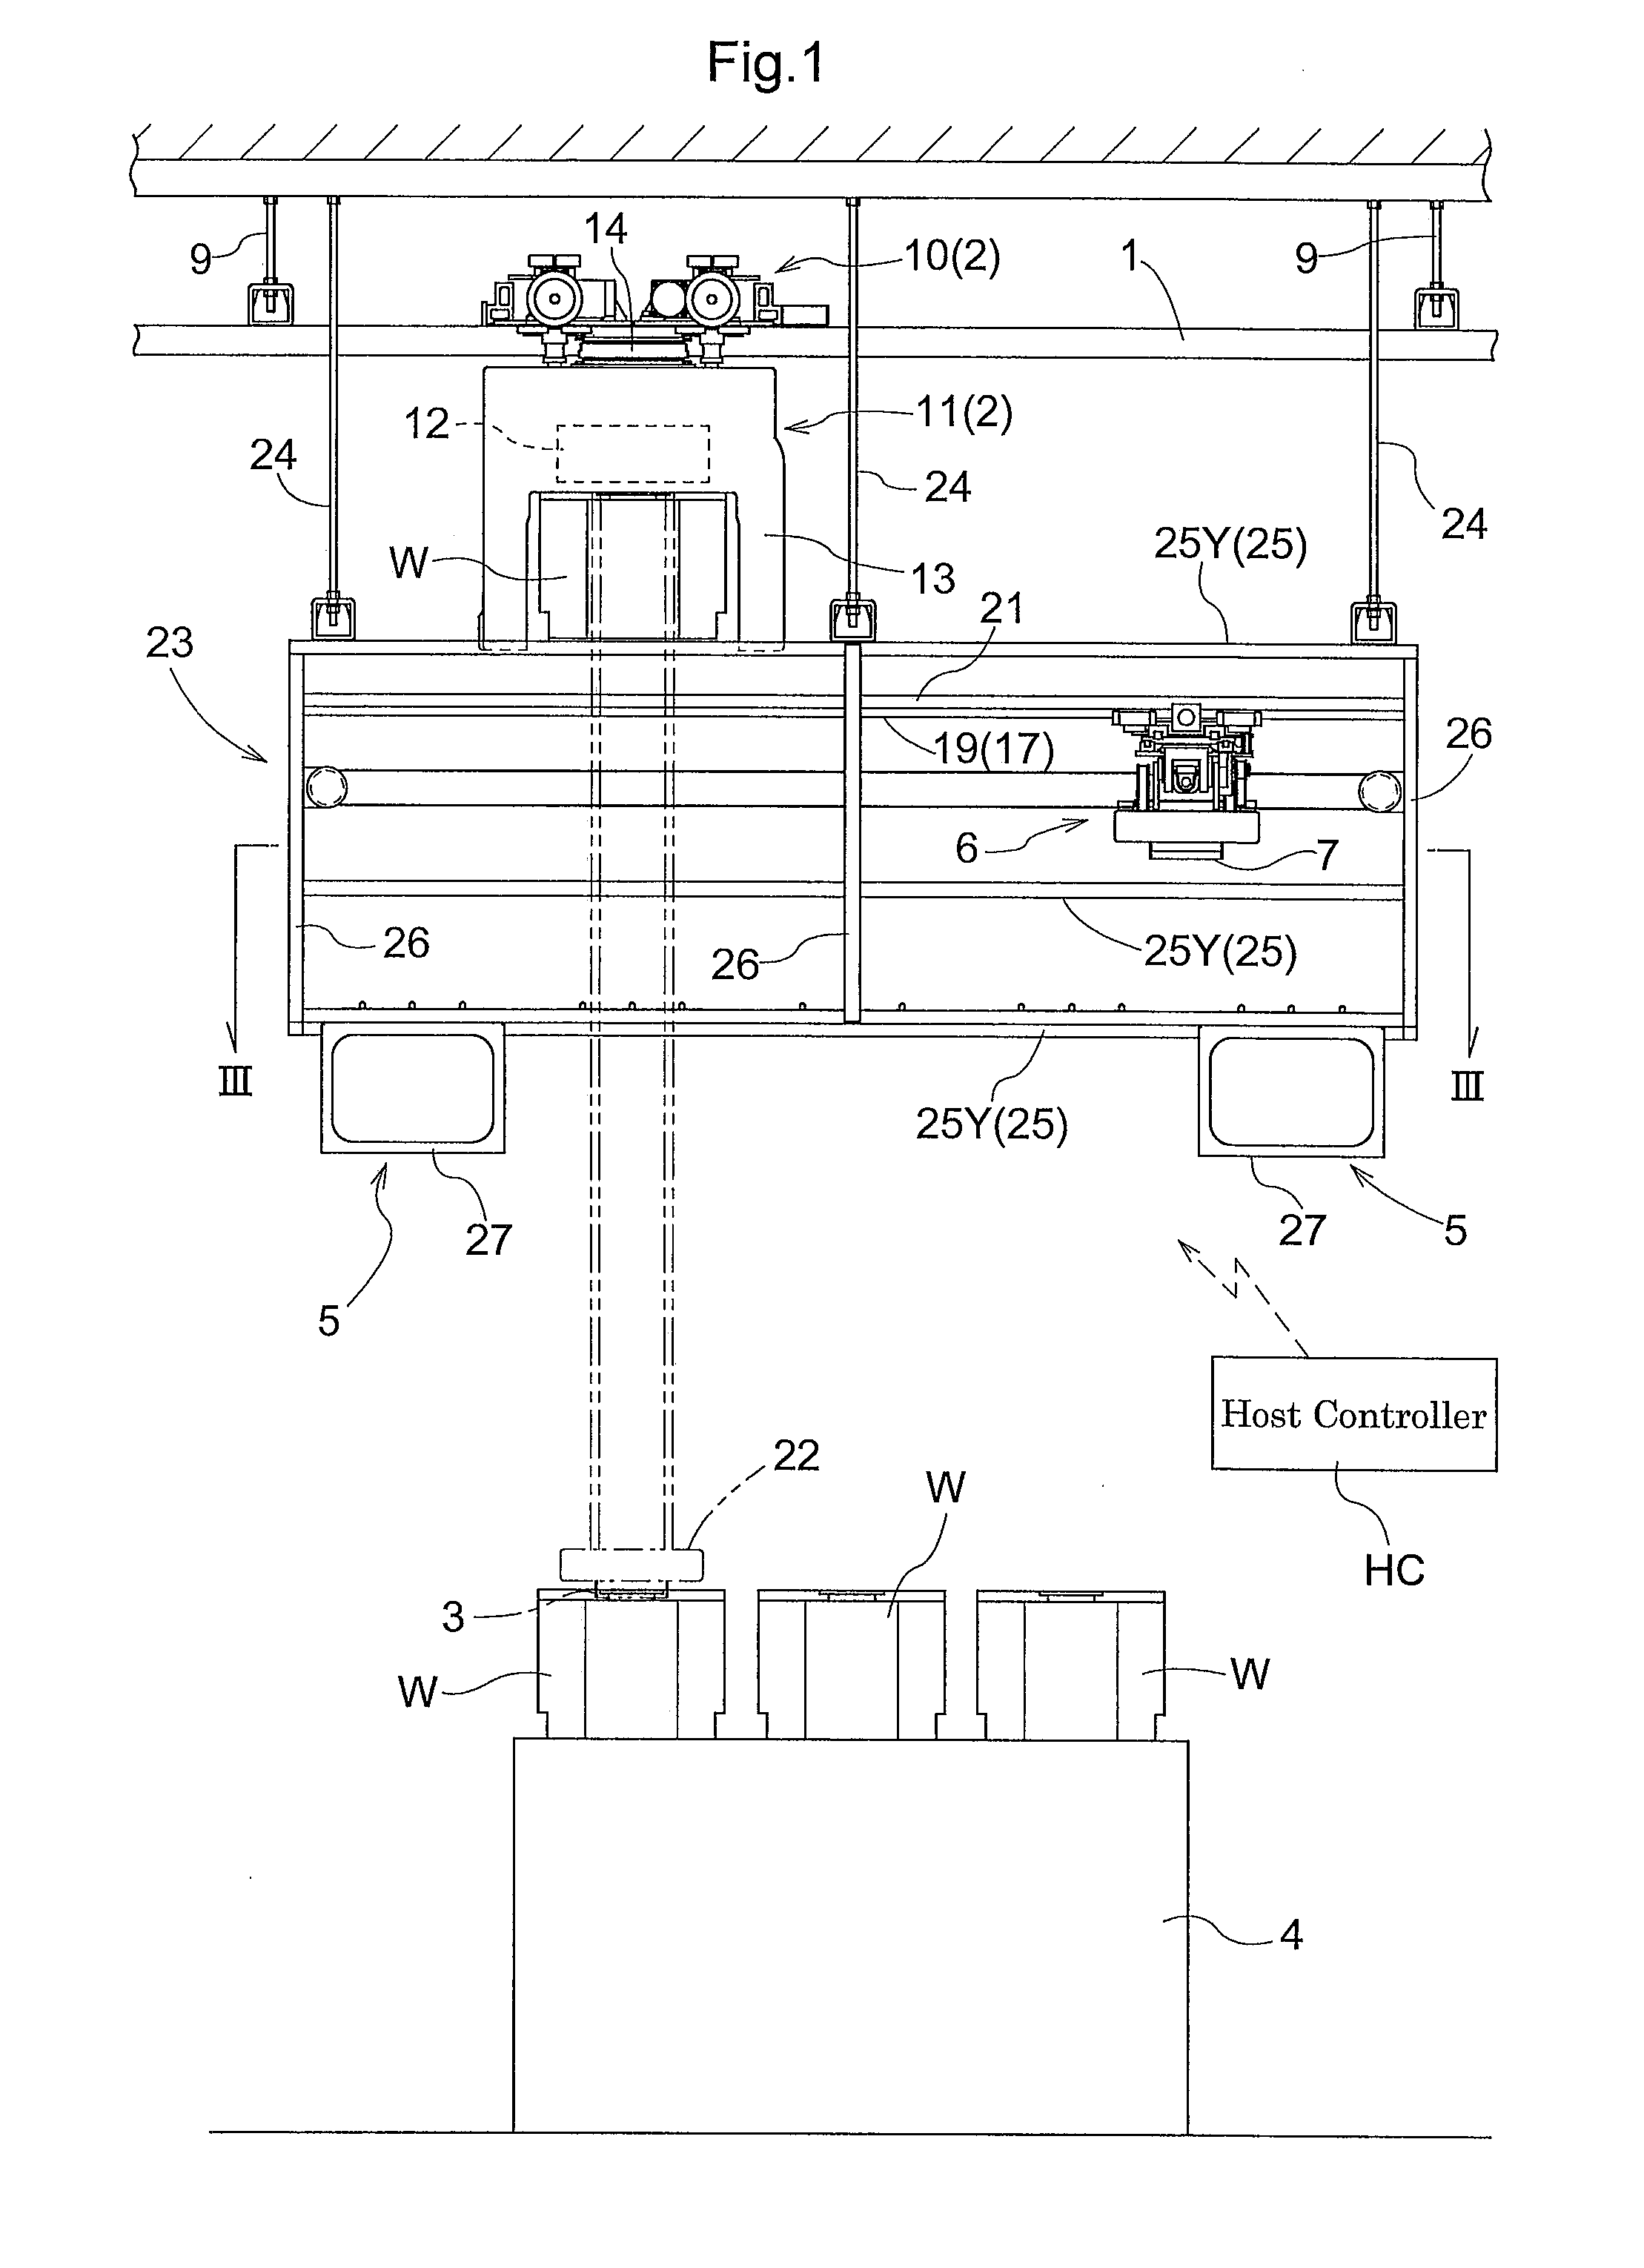 Article transport facility with intermediate transfer device